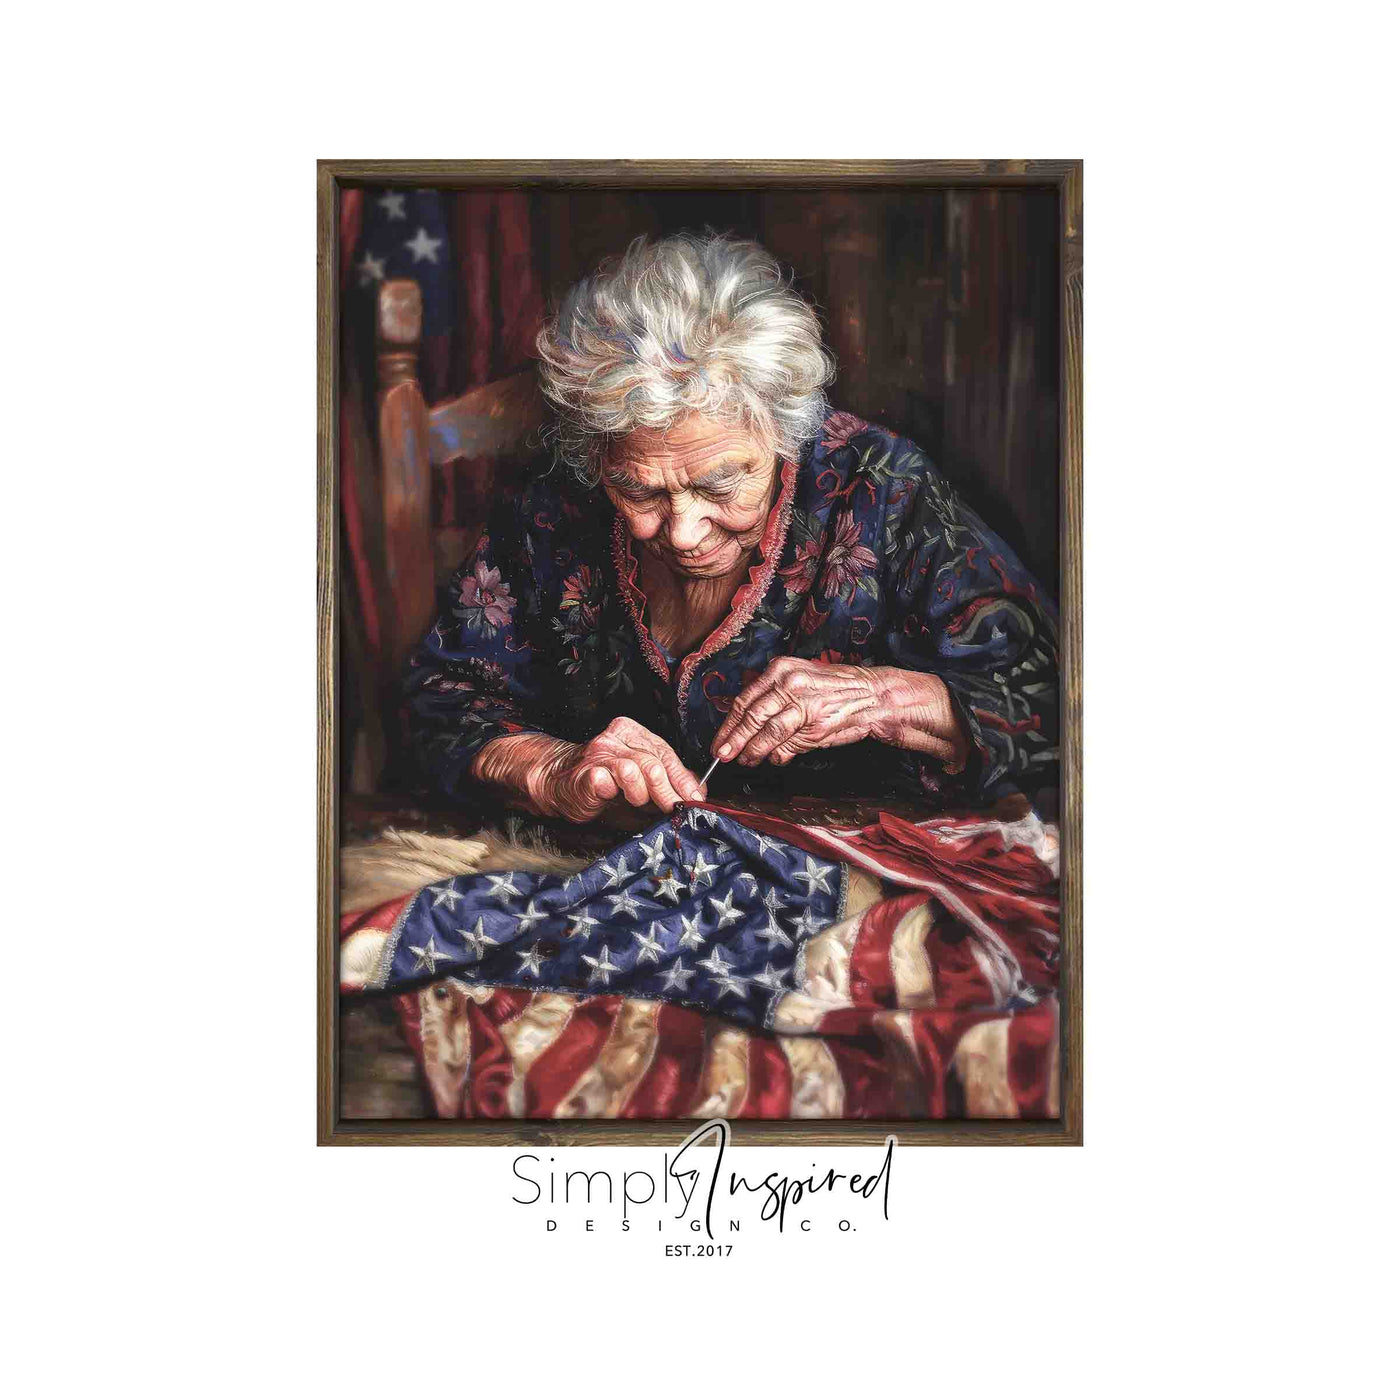 Mending Old Glory